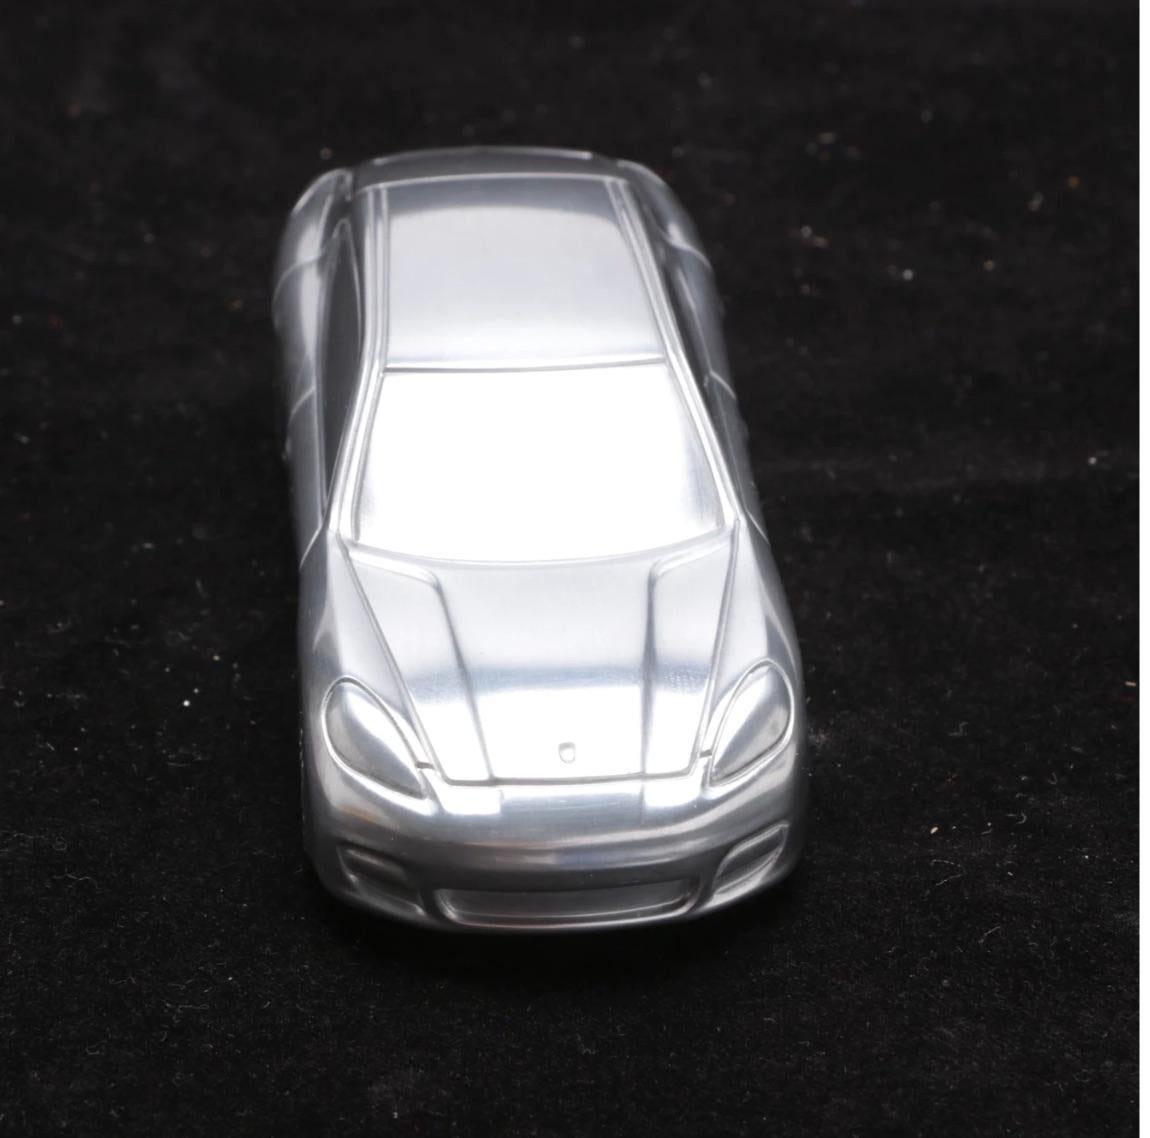 A great gift for your man!!!
A shiny silver tone solid metal Porsche limited edition model of the Panamera Turbo in the original conforming black box.
This was given to a Tycoon automobile collector when he purchased the Porsche, so models were